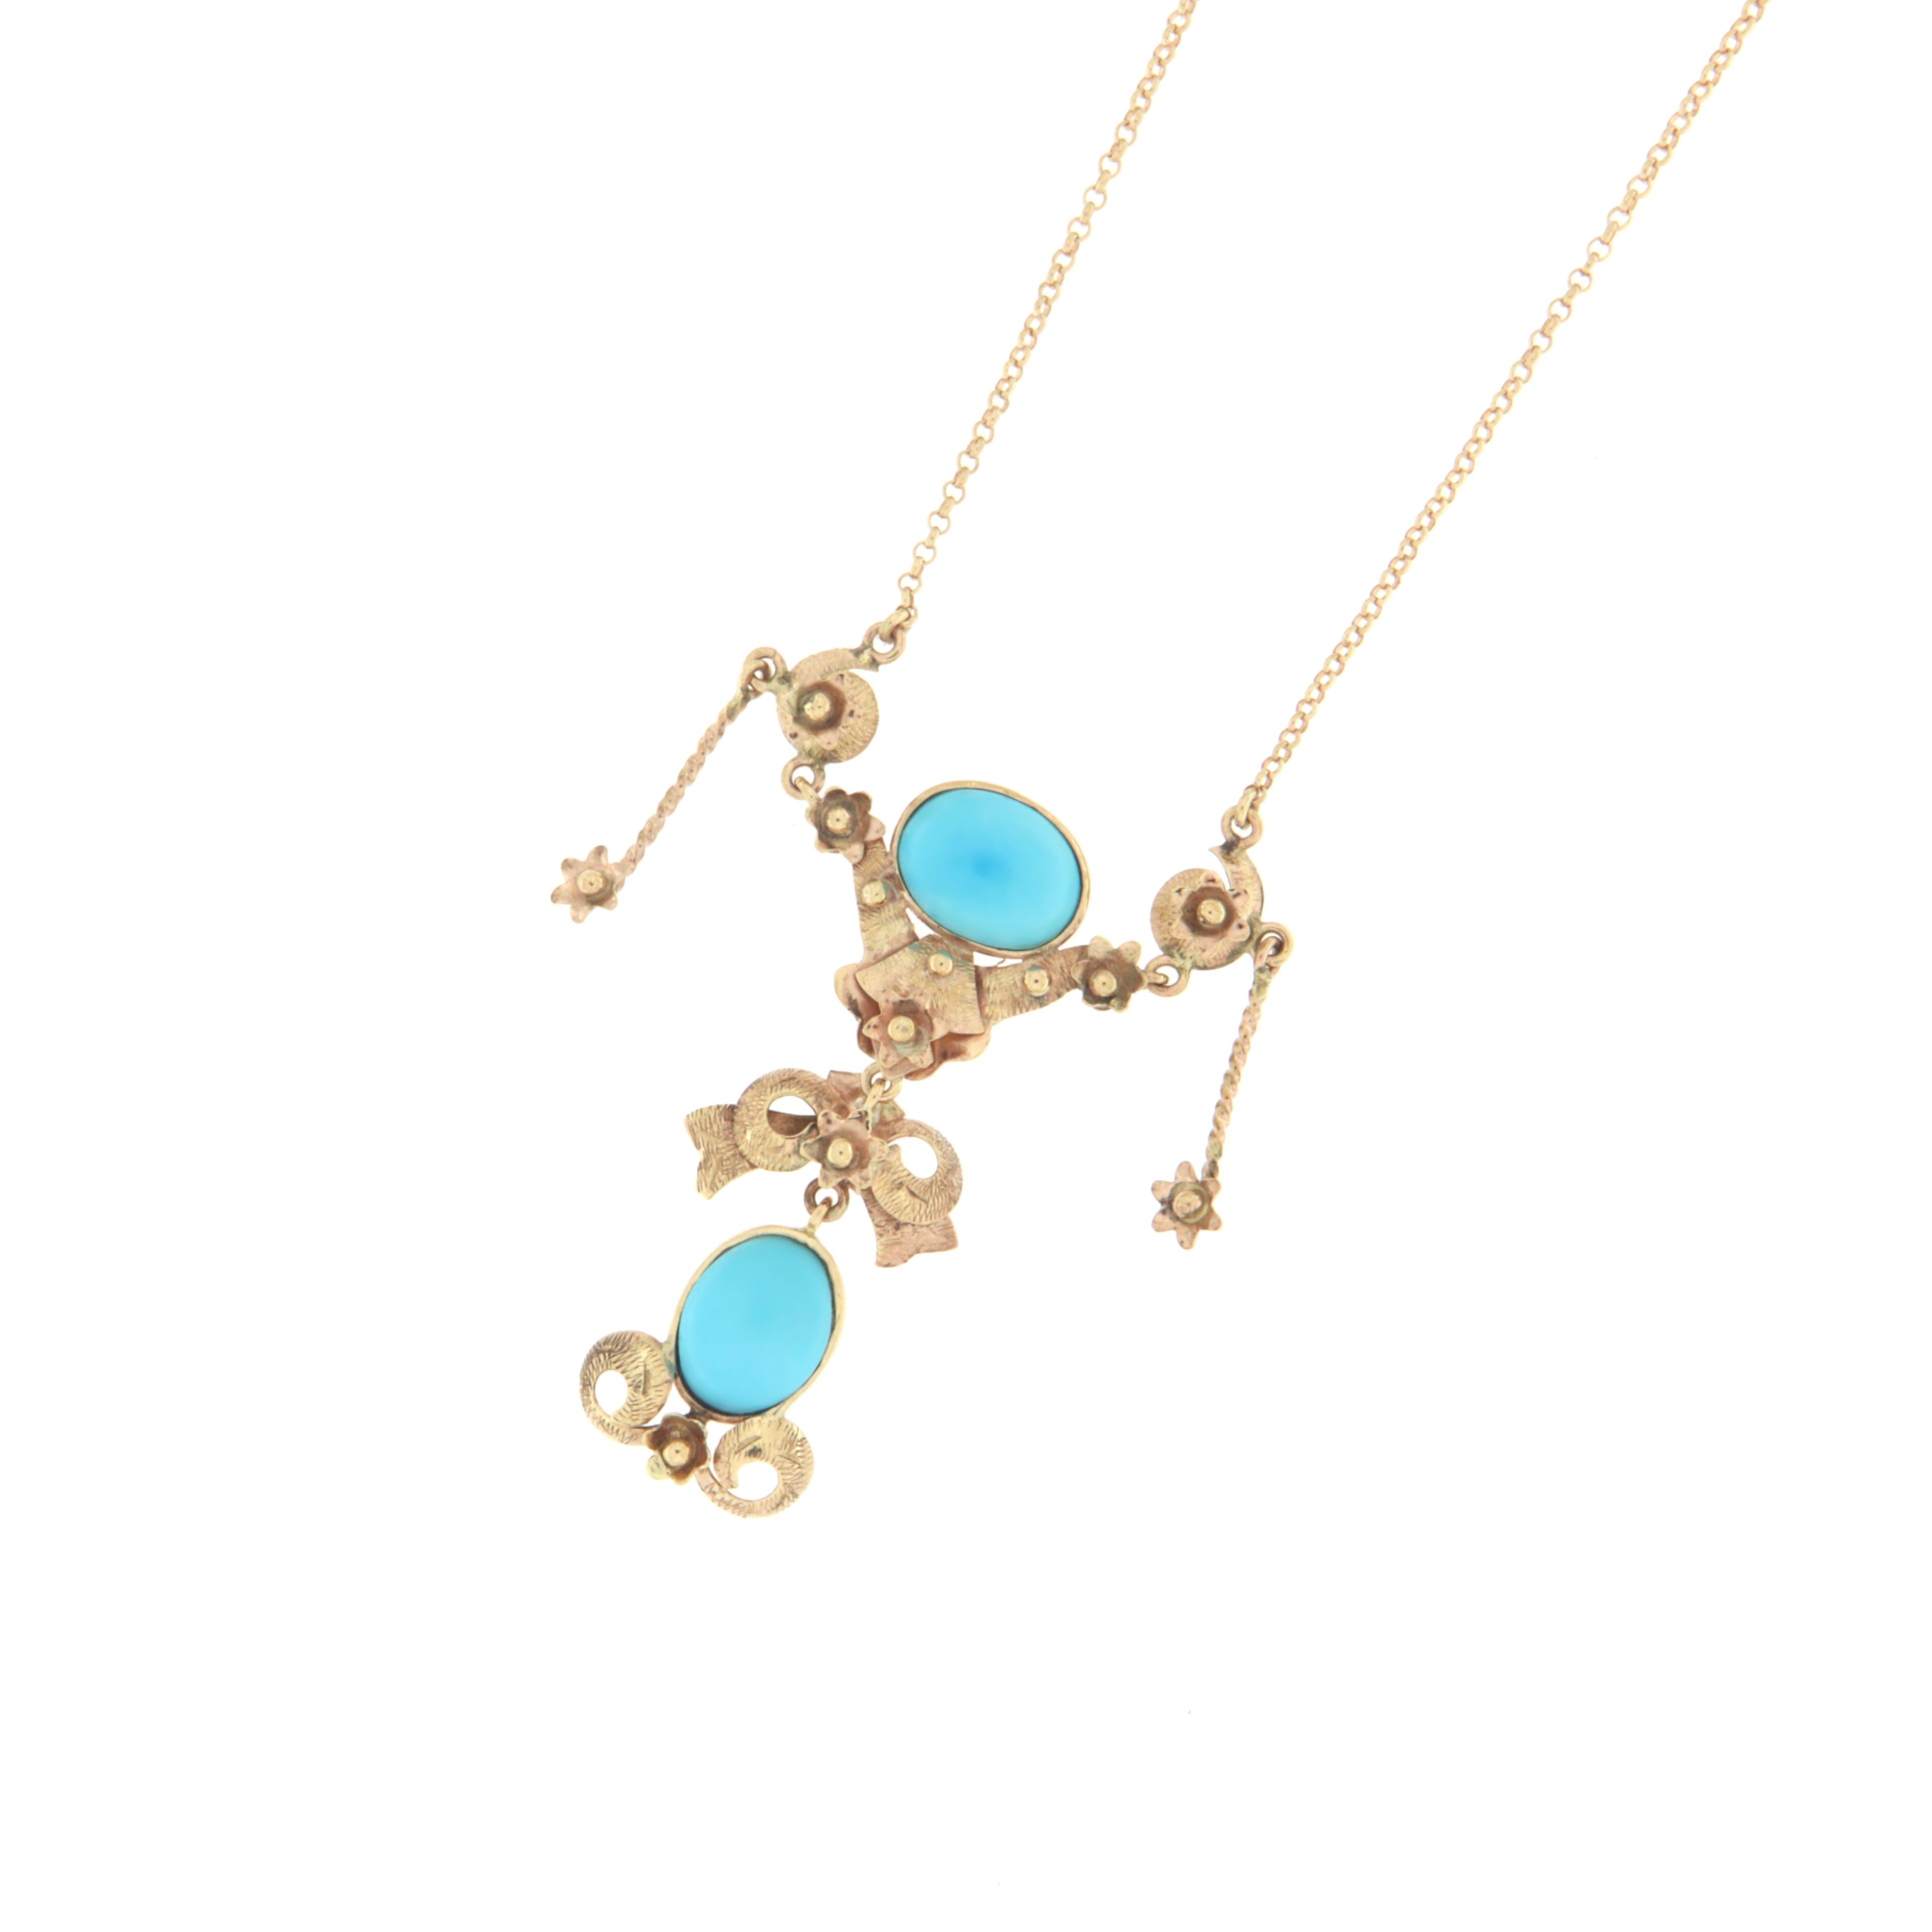 Handcraft Turquoise 9 Karats Yellow Gold Pendant Necklace  In Excellent Condition For Sale In Marcianise, IT